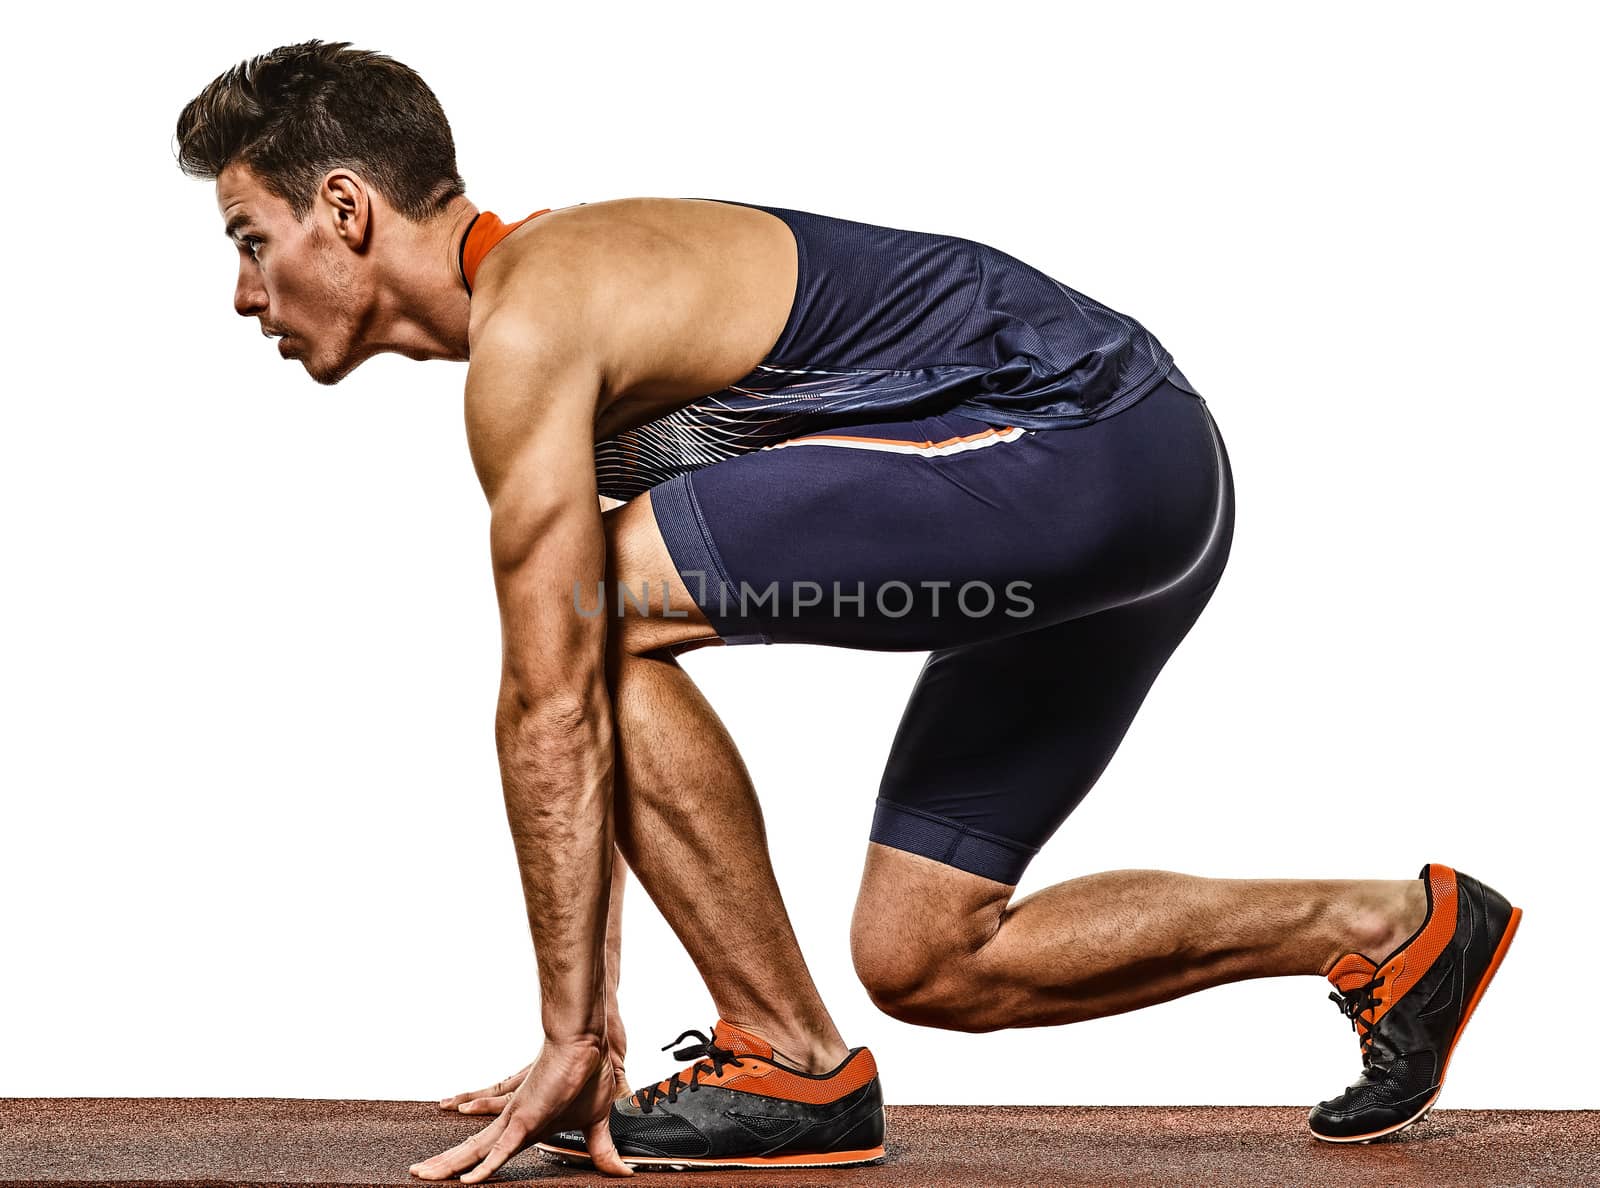 one young caucasian man practicing athletics runner running sprinter sprinting in studio isolated on white background